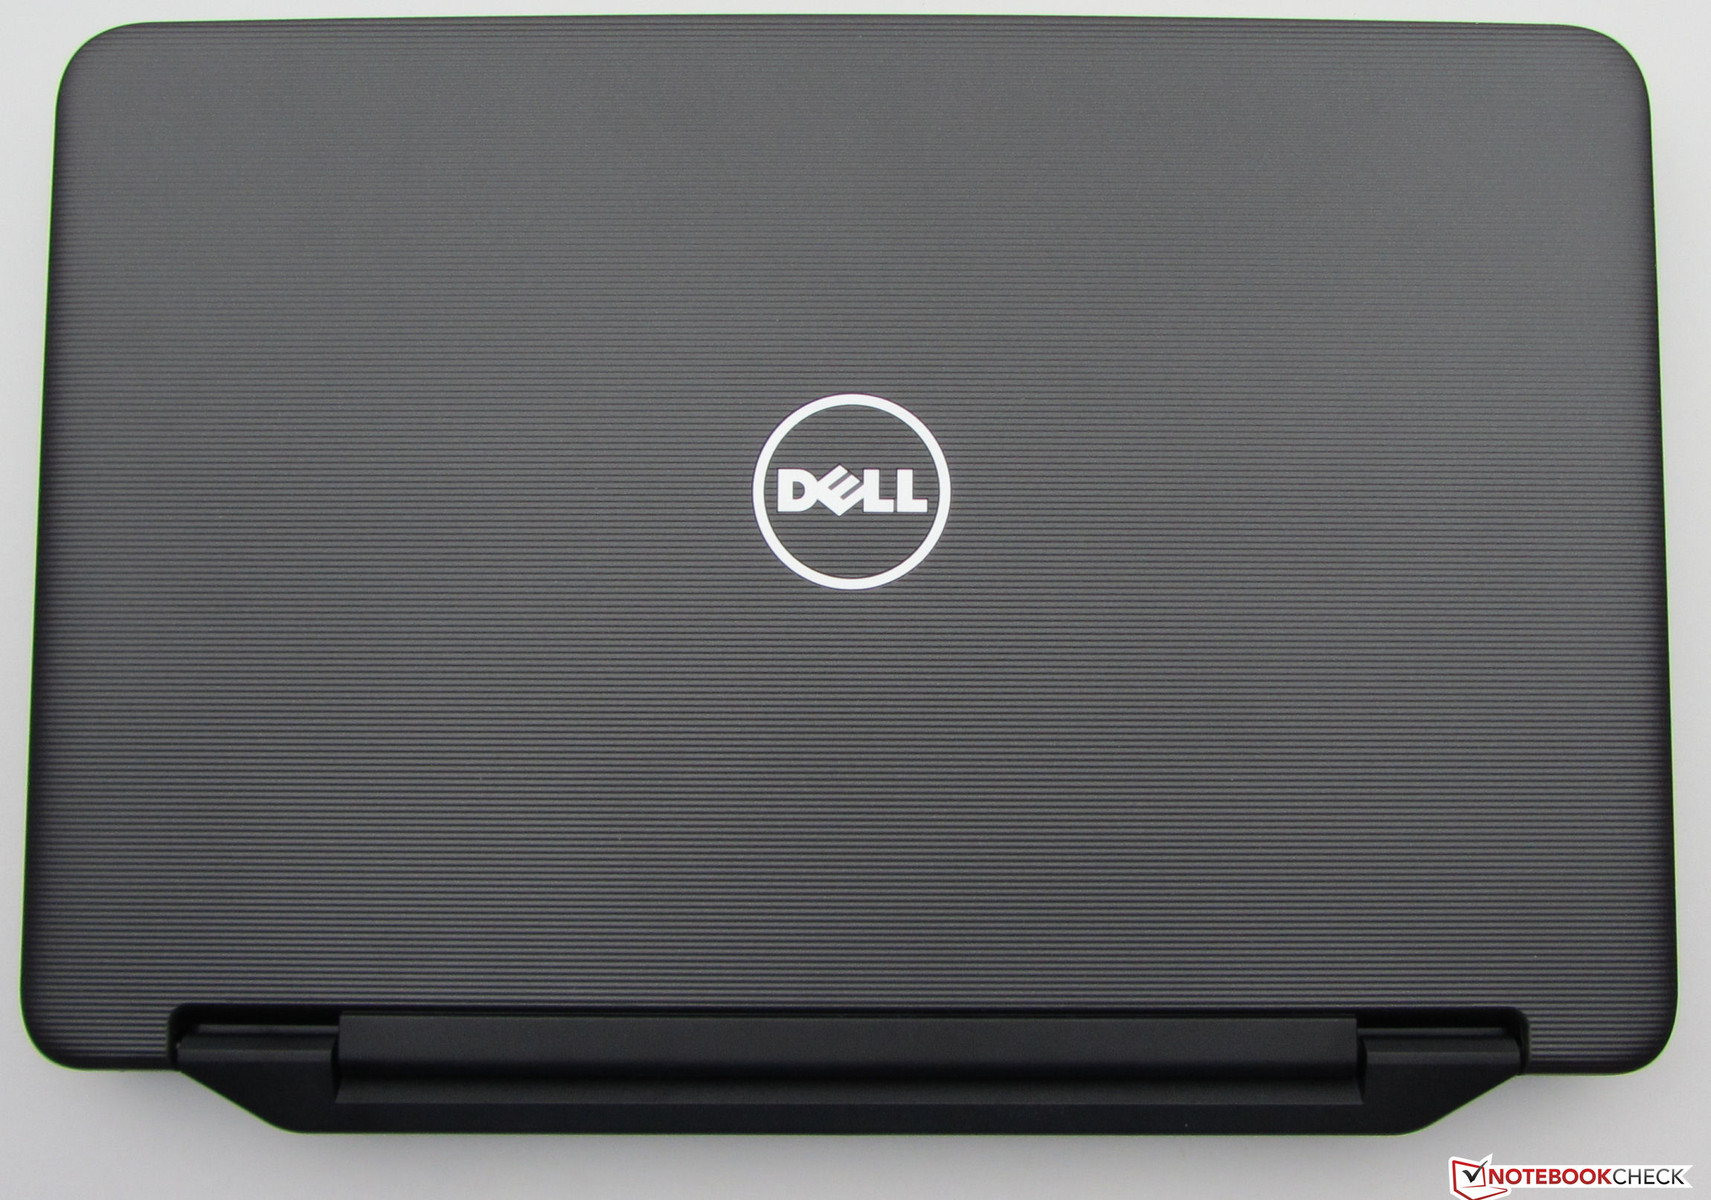 Review Dell Vostro 2520 Notebook - NotebookCheck.net Reviews